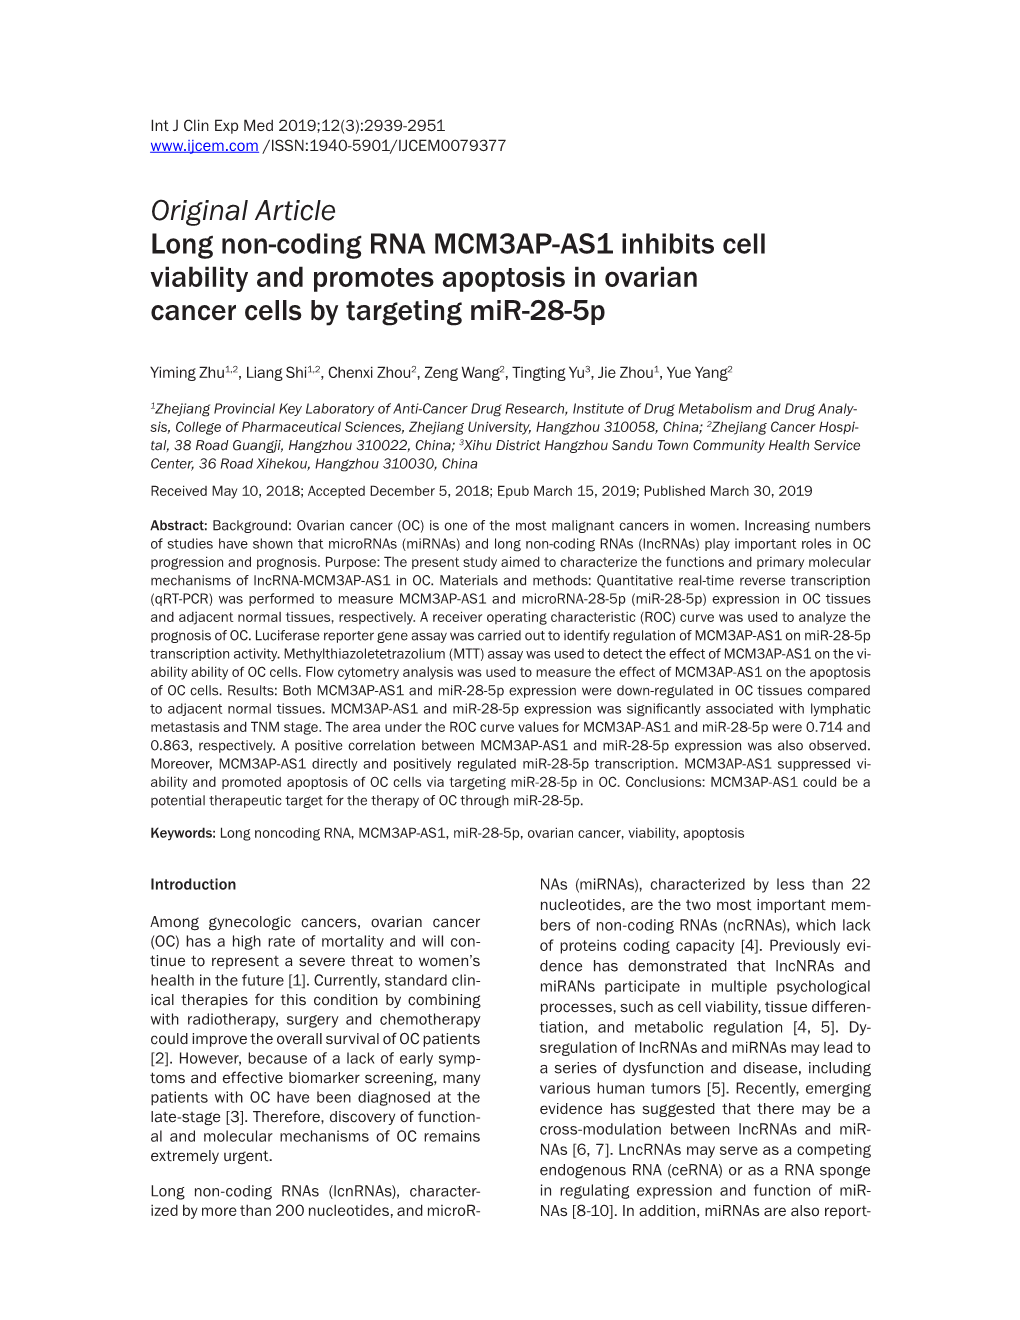 Original Article Long Non-Coding RNA MCM3AP-AS1 Inhibits Cell Viability and Promotes Apoptosis in Ovarian Cancer Cells by Targeting Mir-28-5P